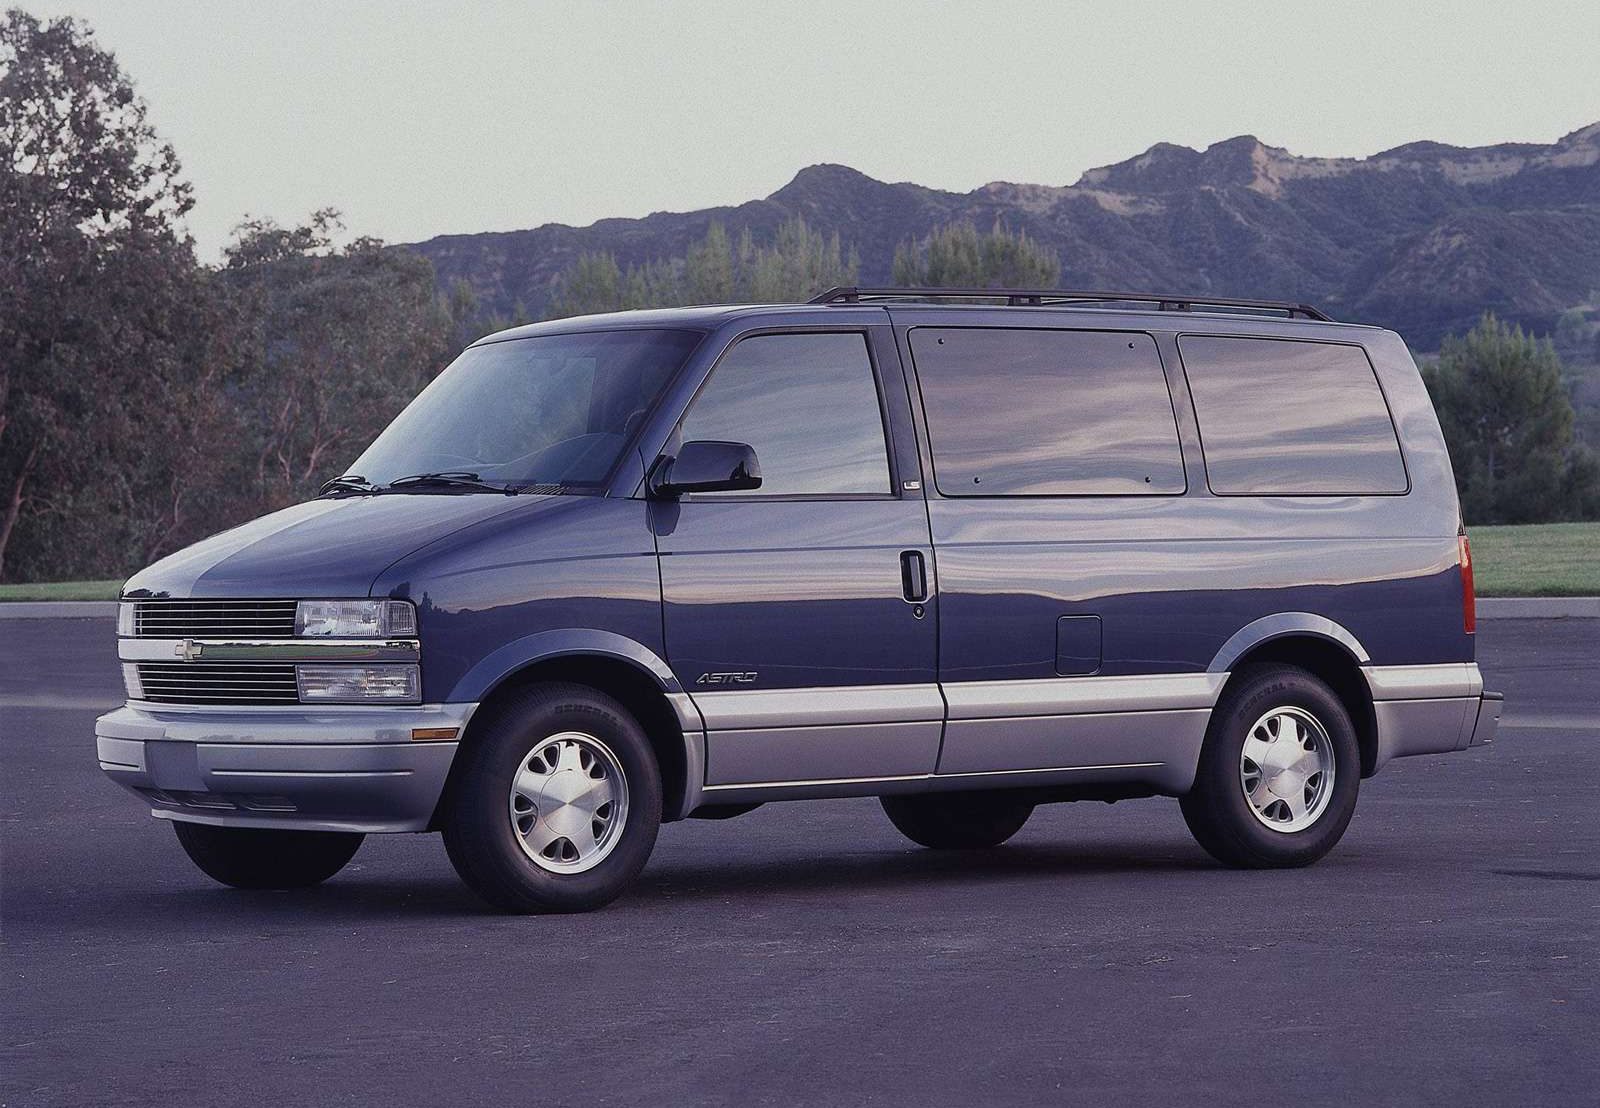 An image of a Chevrolet Astro parked outside.